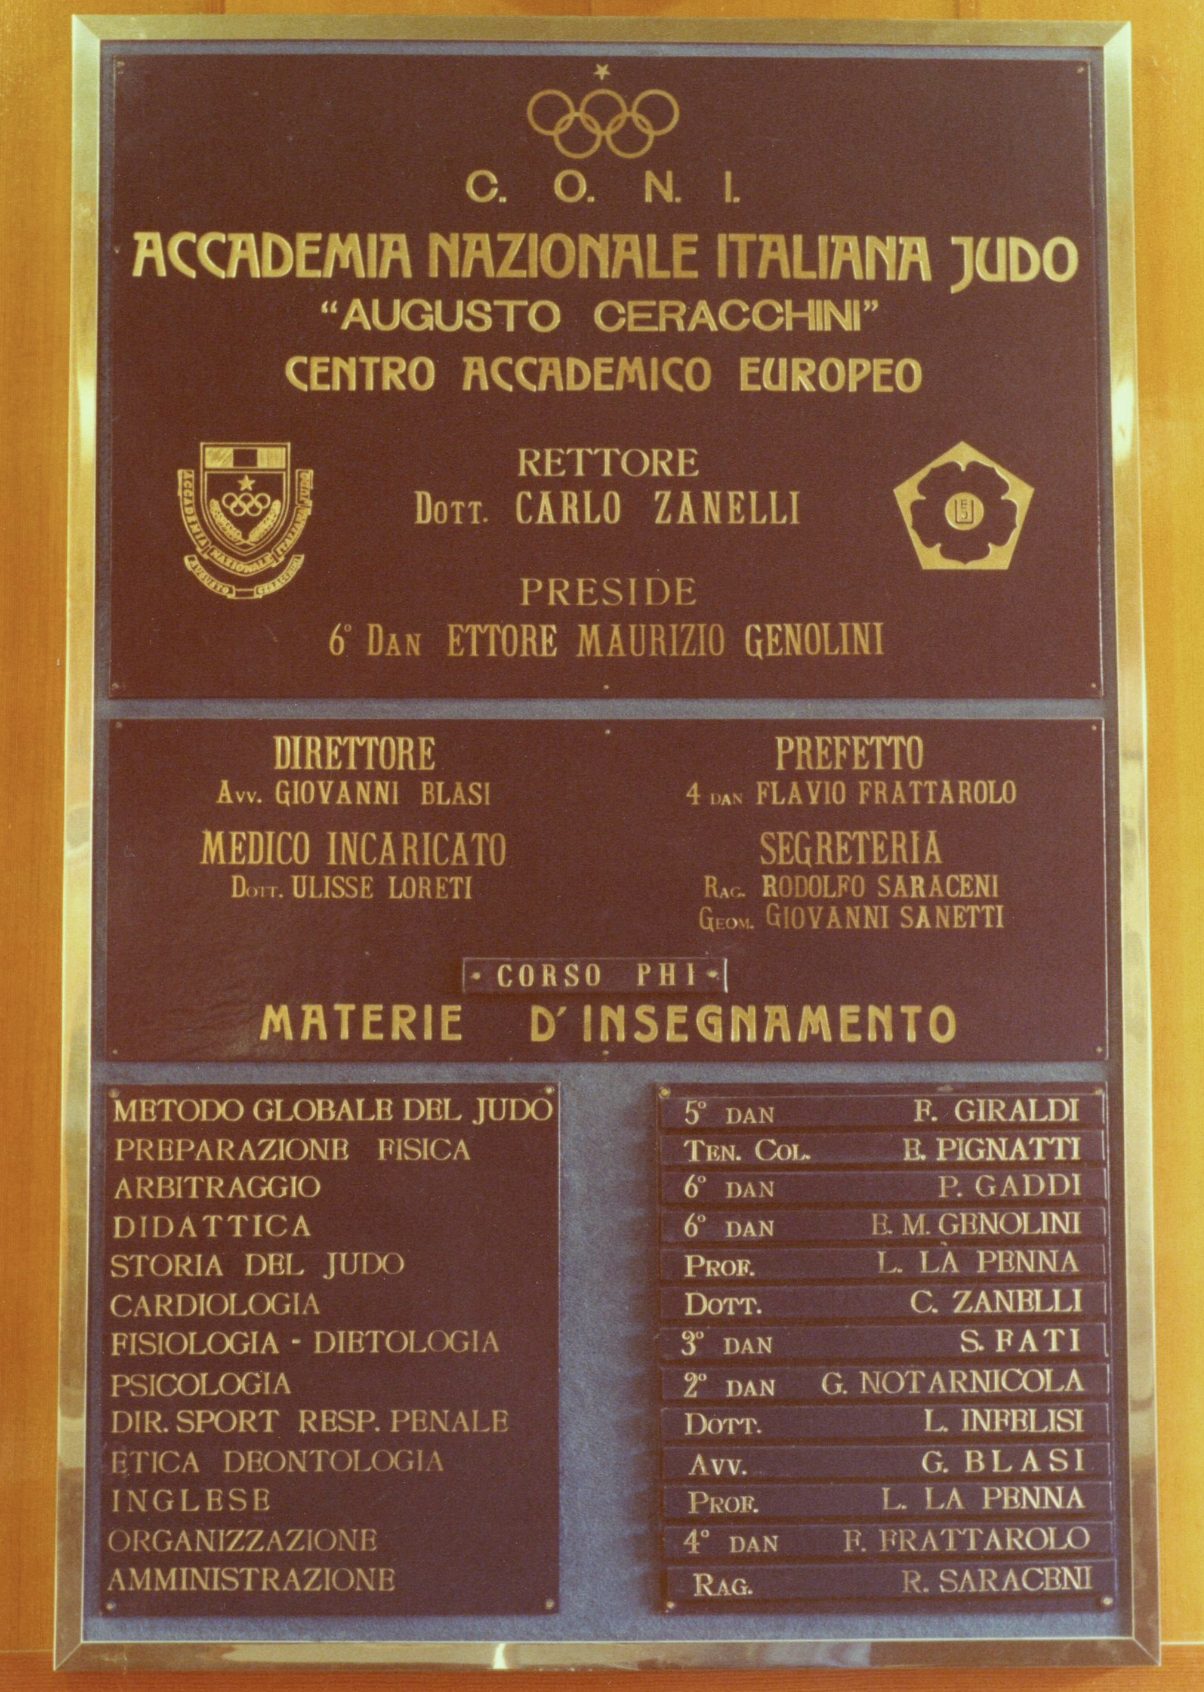 images/JUDO/large/accademianazionale.png